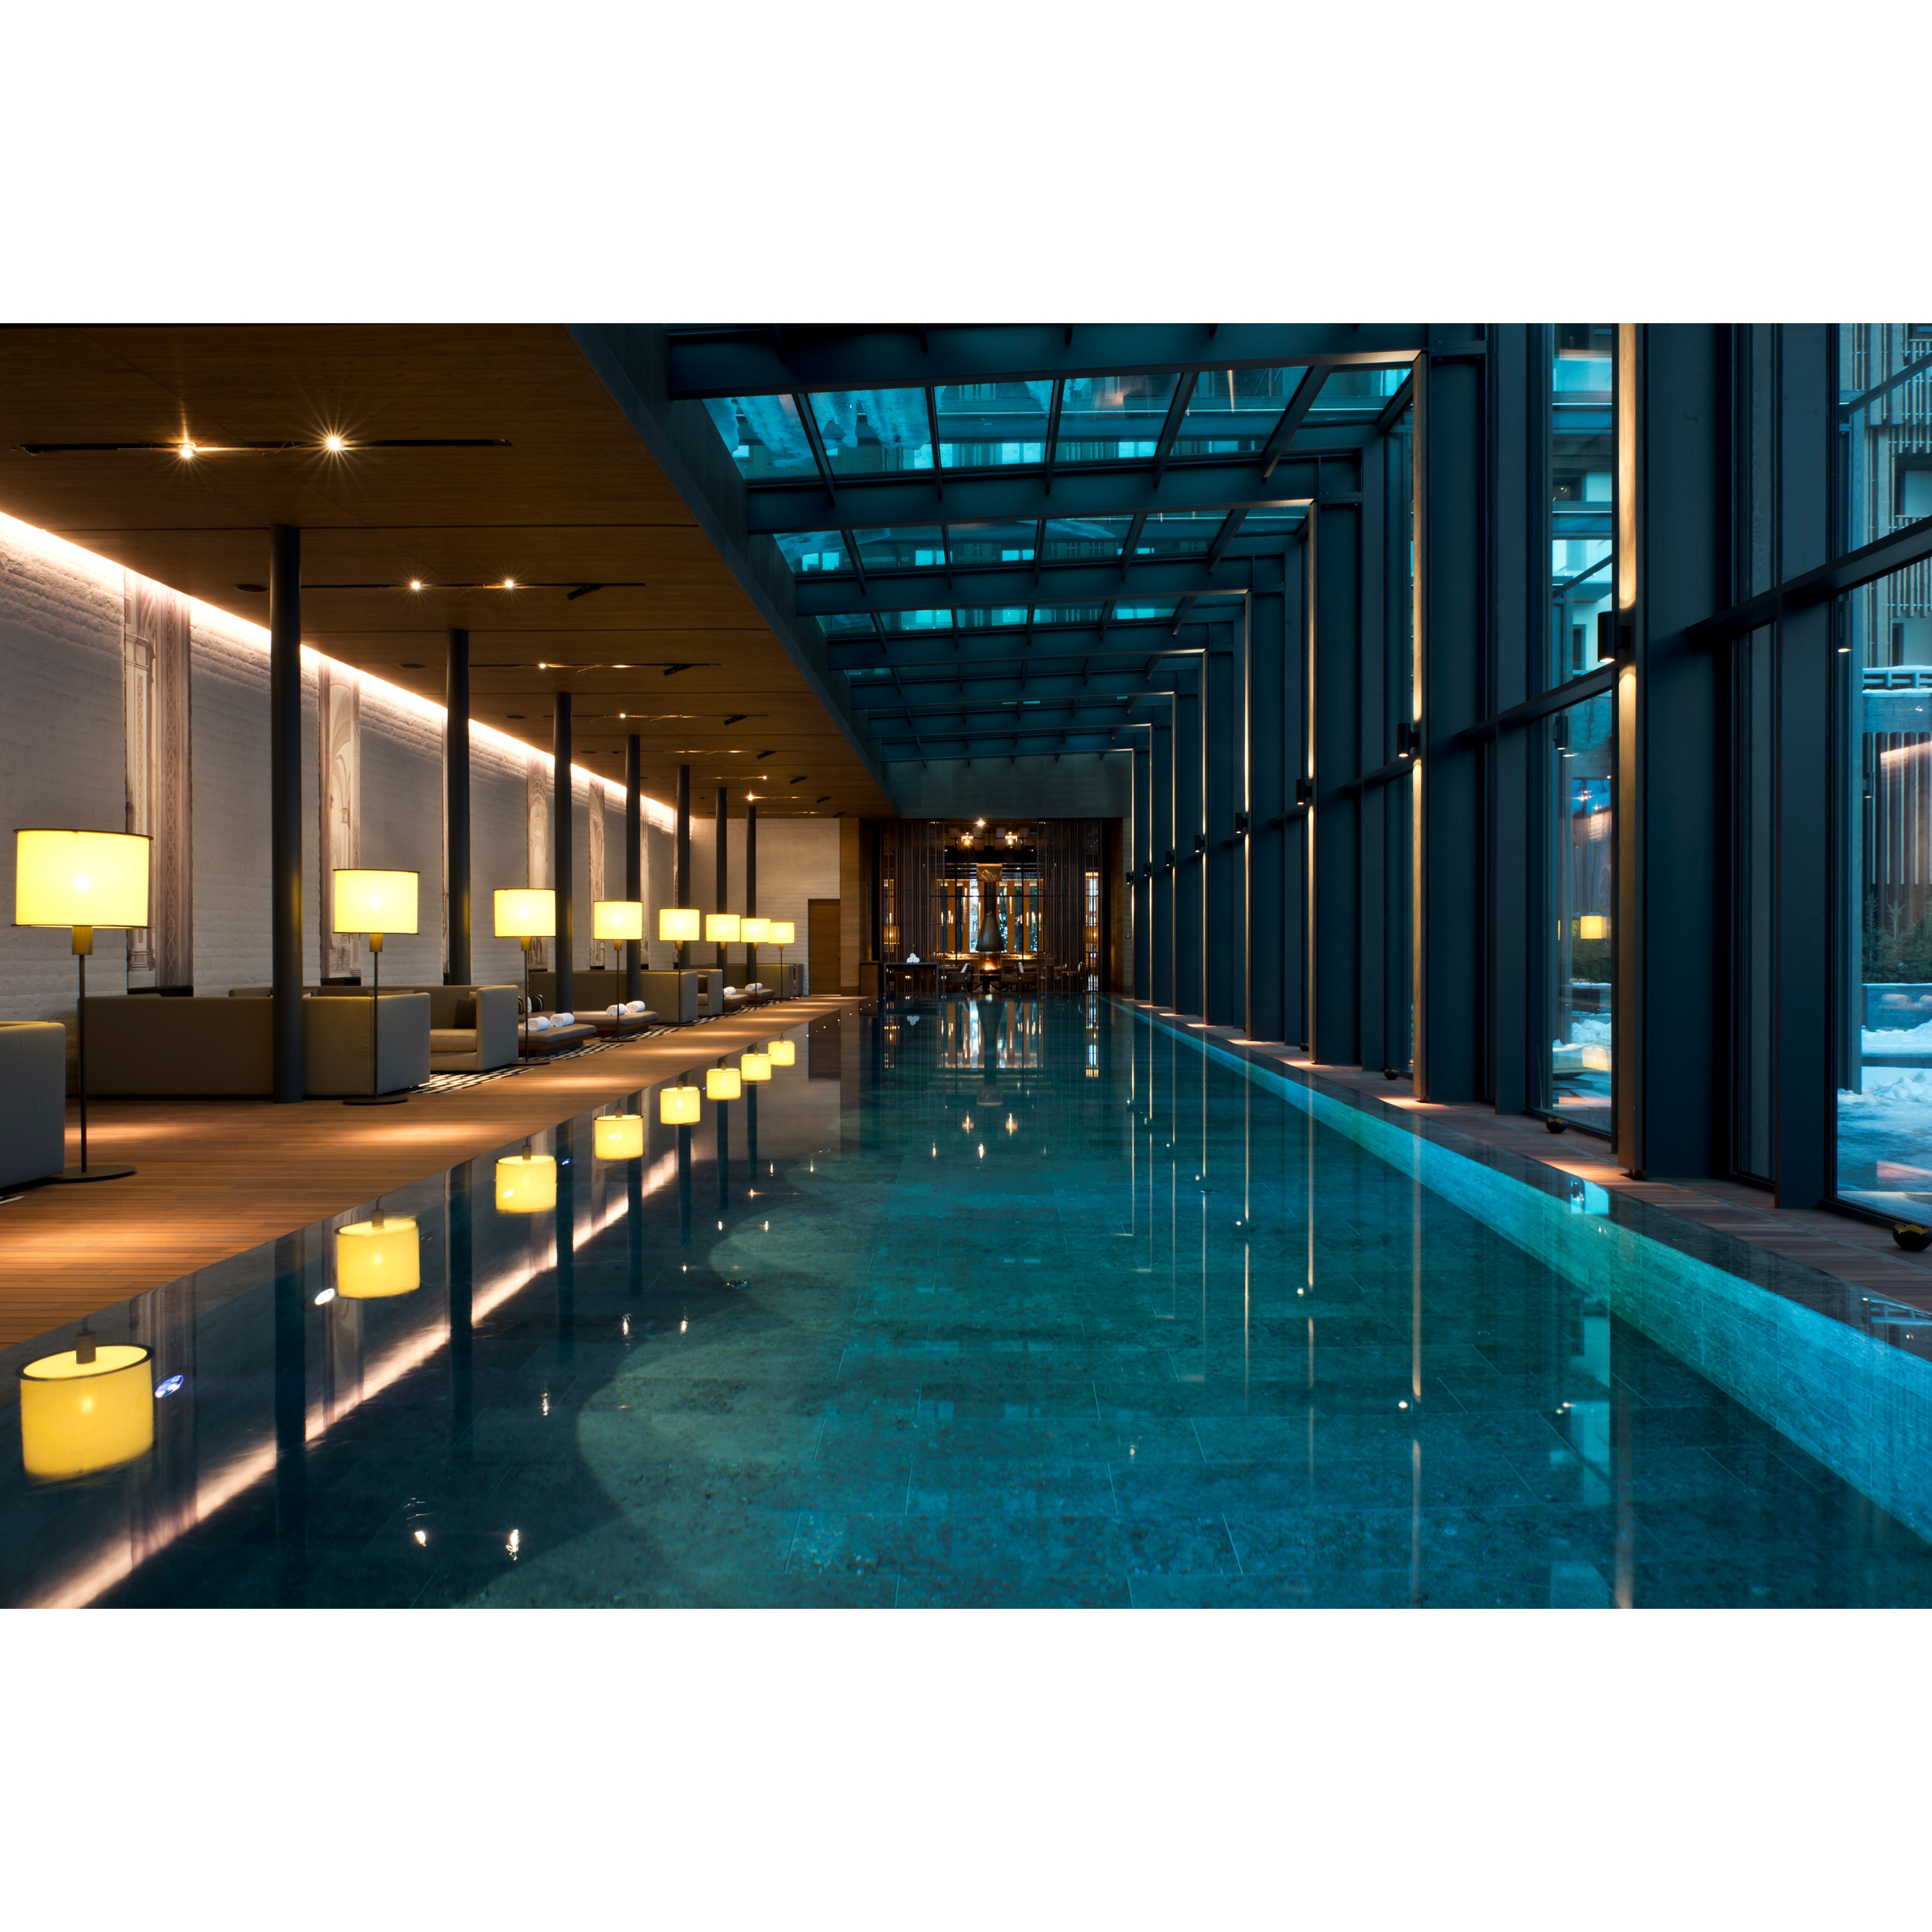 Indoor pool at The Chedi Andermatt. Clear calm water. On the left side are floor lamps next to cozy corners with couches.